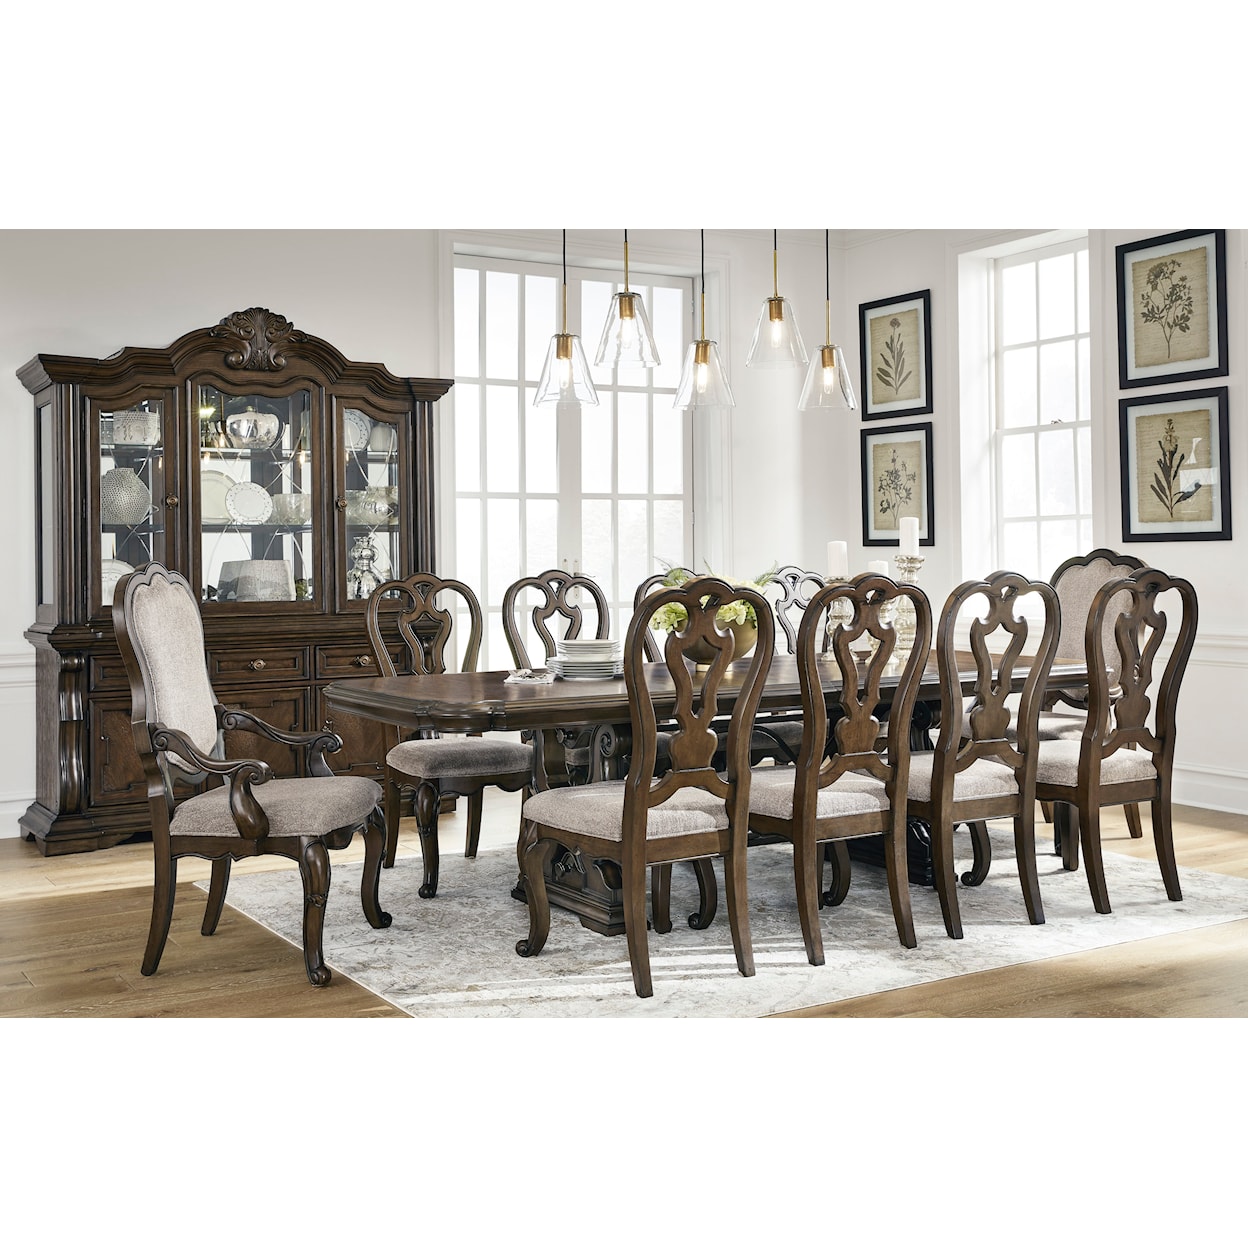 Signature Design by Ashley Furniture Maylee Dining Set